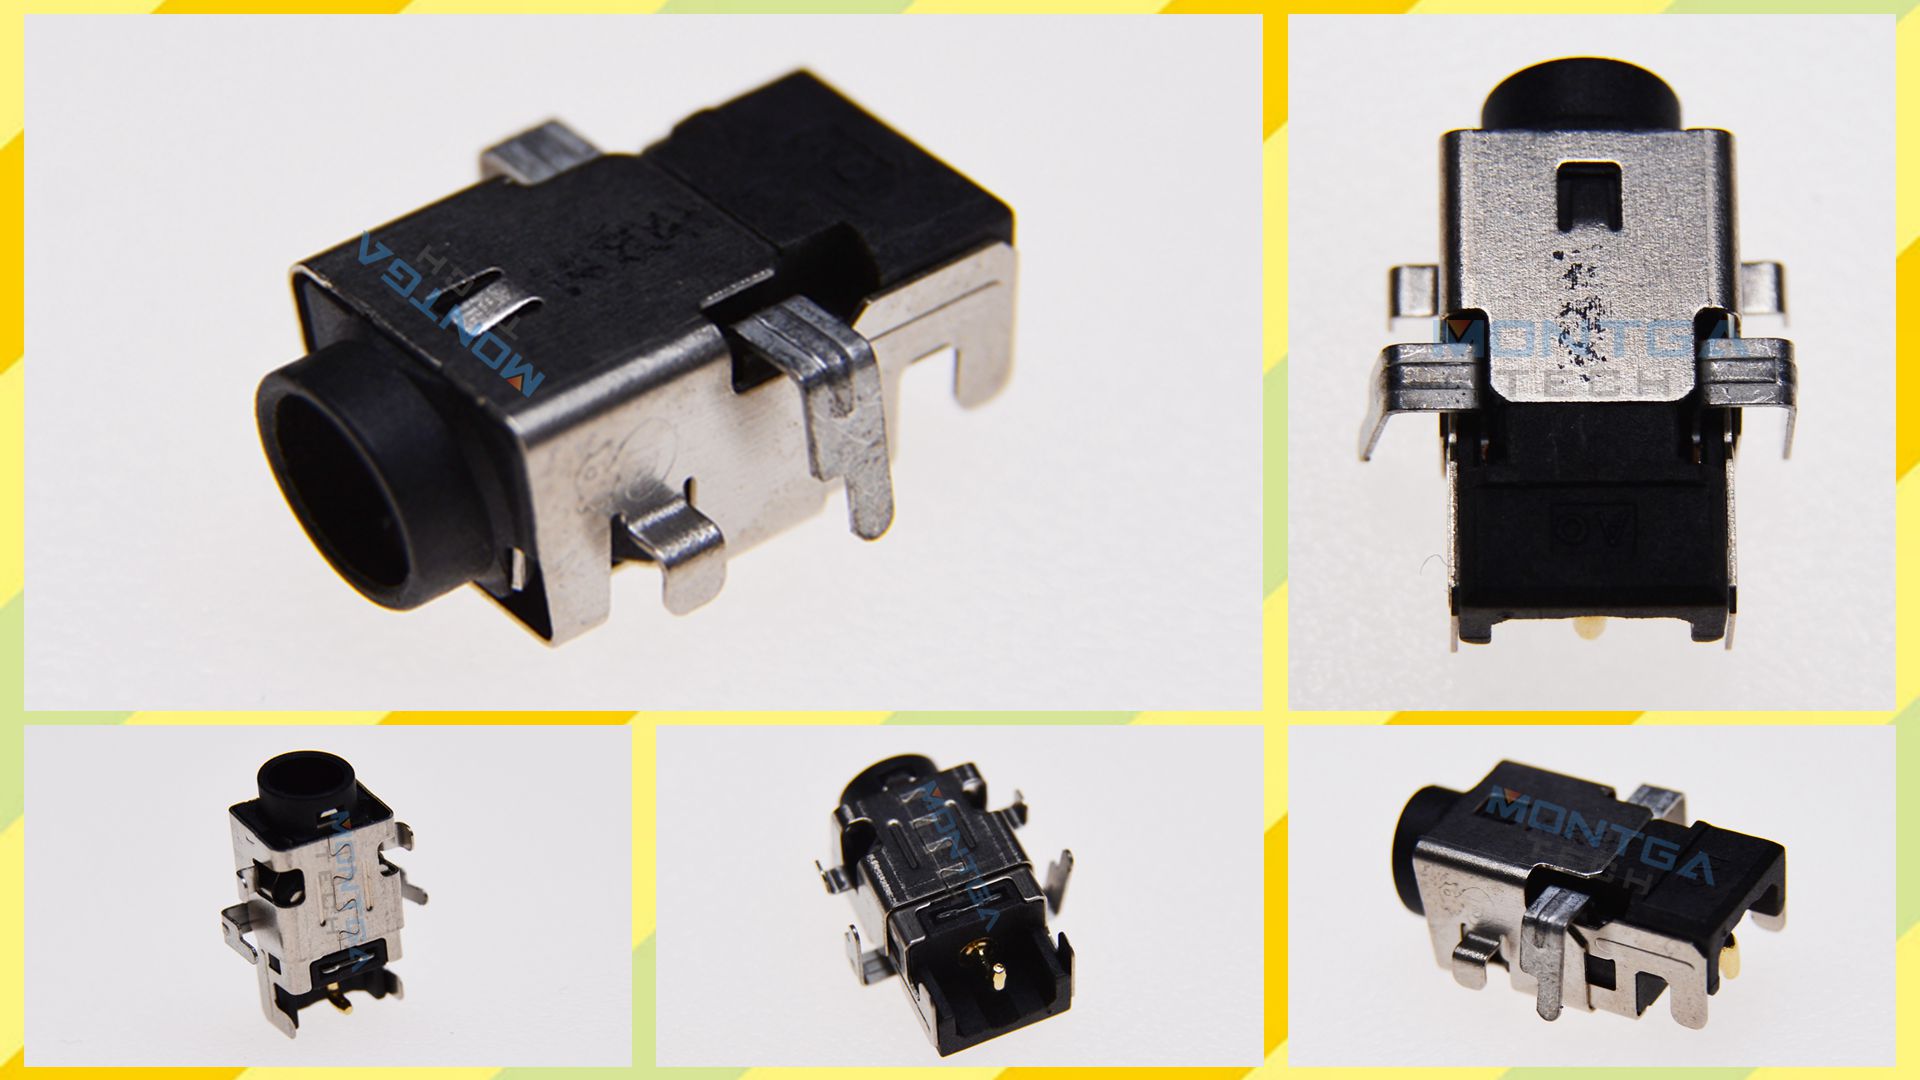 Asus C300MA charging connector, Asus C300MA DC Power Jack, Asus C300MA Power Jack, Asus C300MA plug, Asus C300MA Jack socket, Asus C300MA connecteur de charge, 